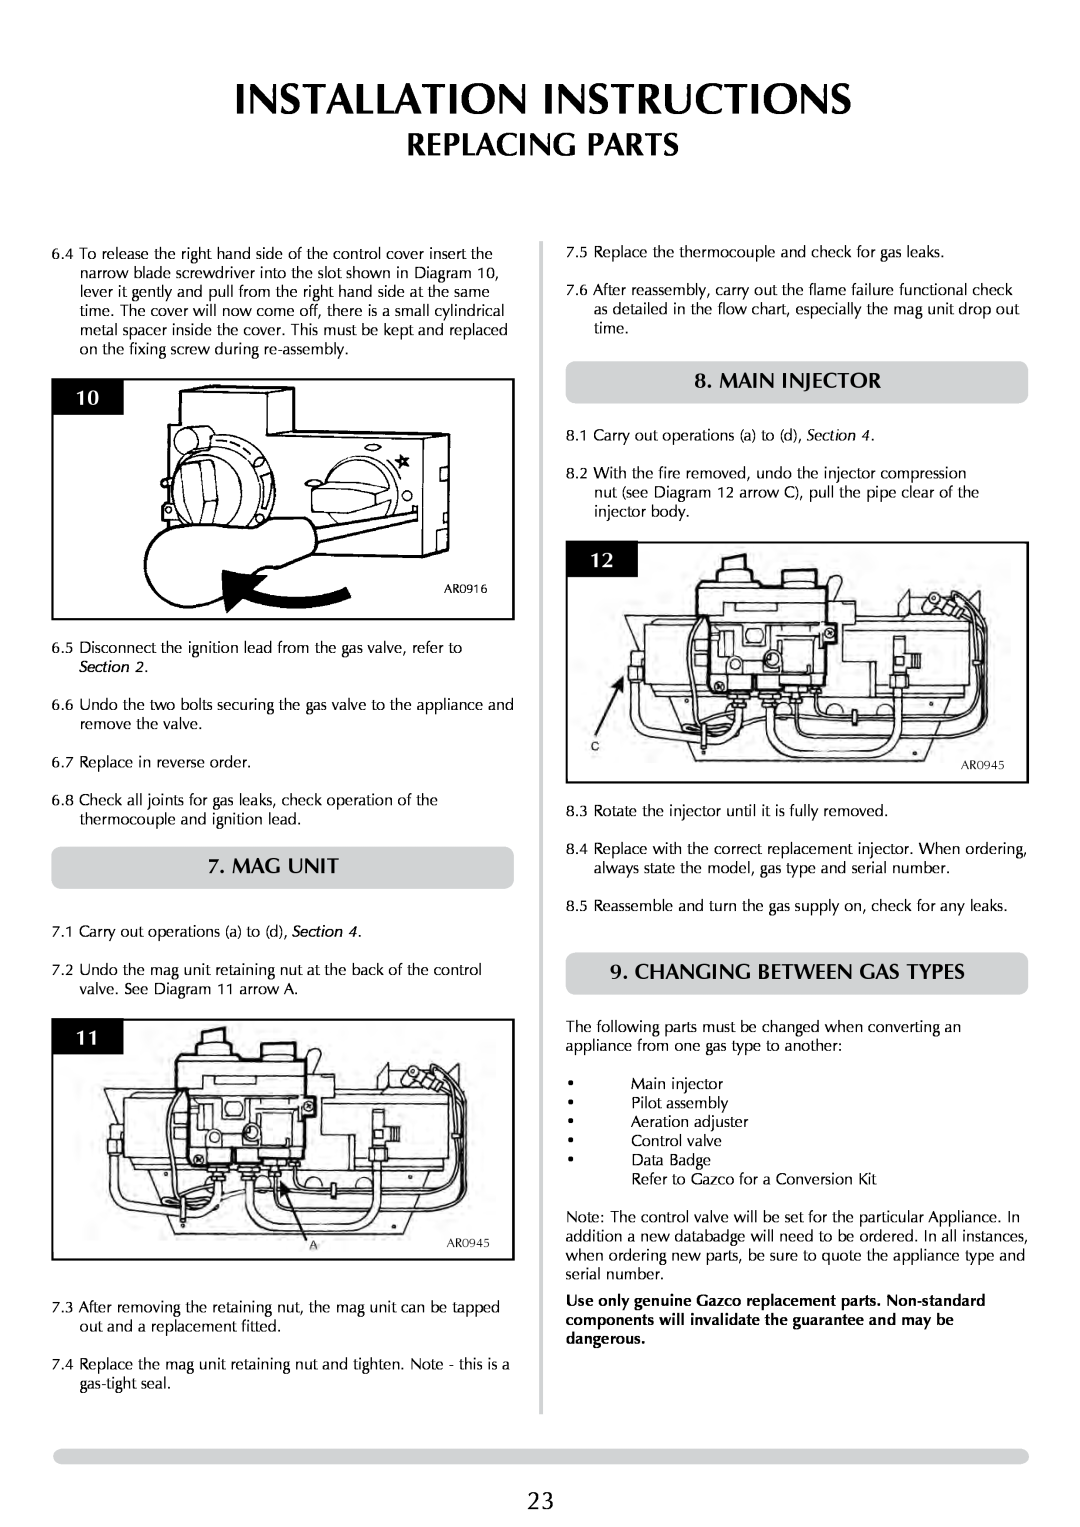 Stovax 8455 manual Installation Instructions, Replacing Parts, Mag Unit, Main Injector, Changing Between Gas Types, Section 